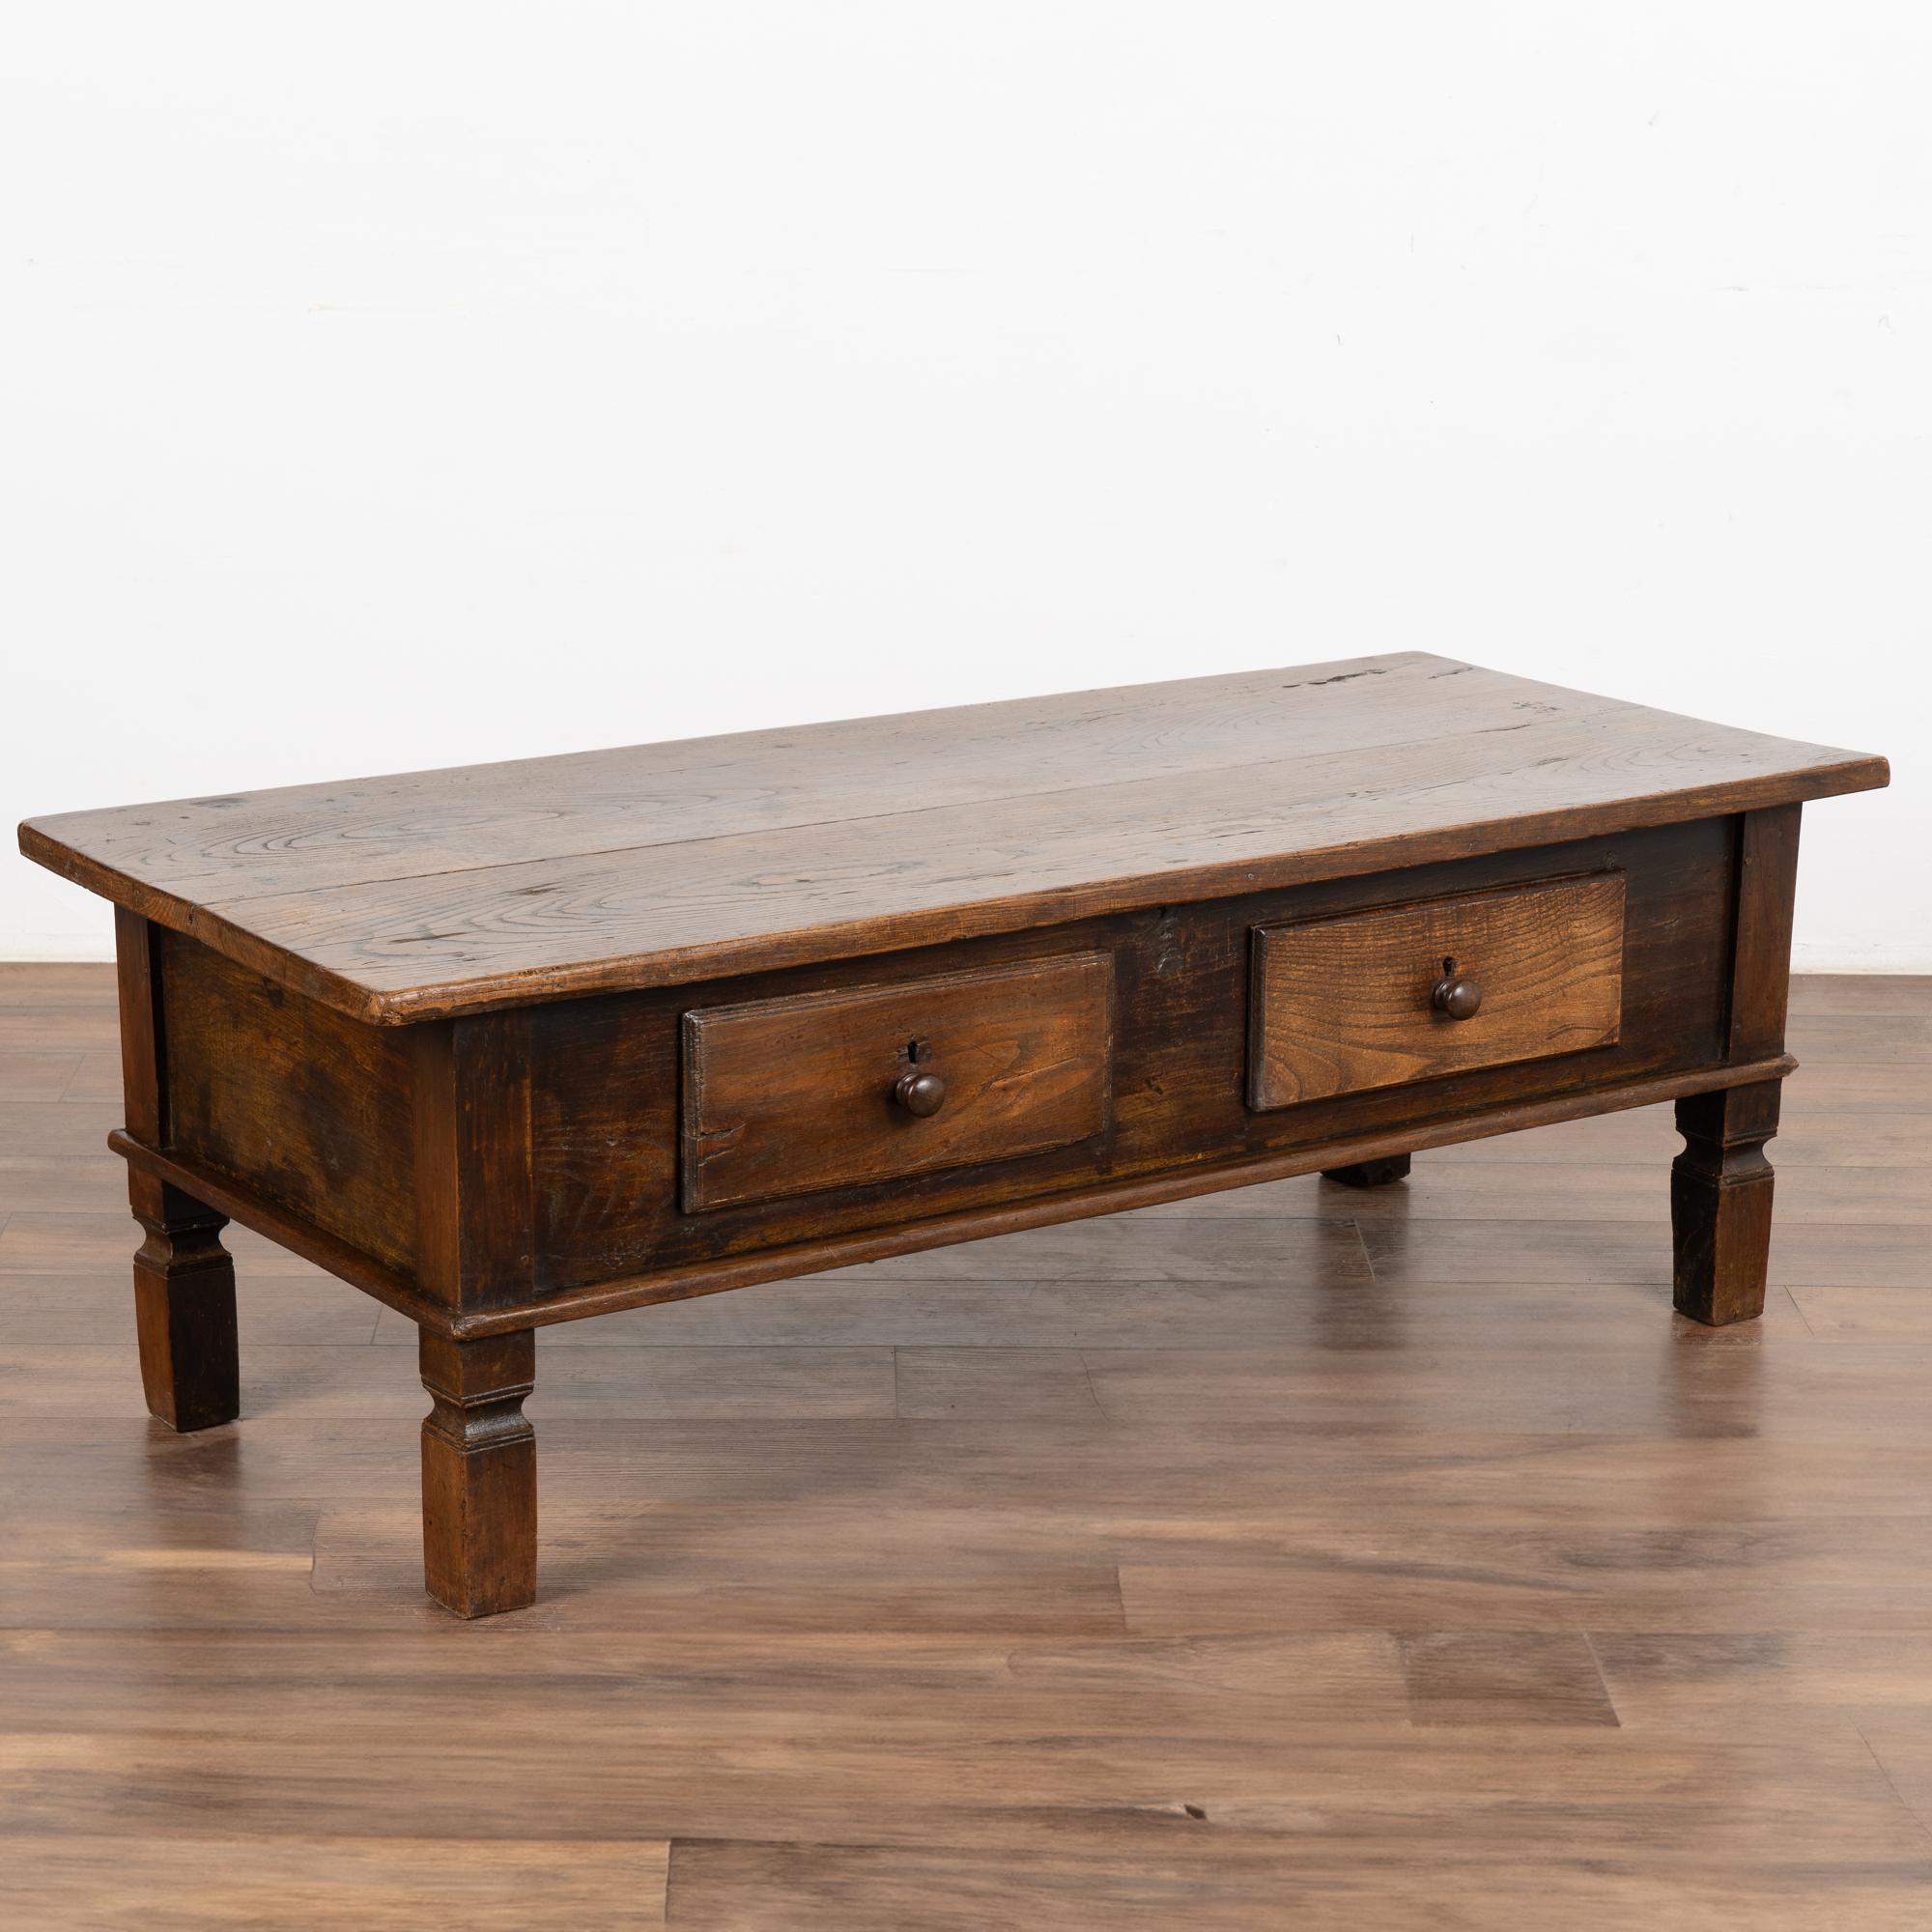 The rustic appeal of this coffee table comes from the aged patina of the worn oak wood. Every scratch, nick, crack and old knarl add to the strong draw of this coffee table Two functional drawers with wooden pulls; 4.5' in length x 2'